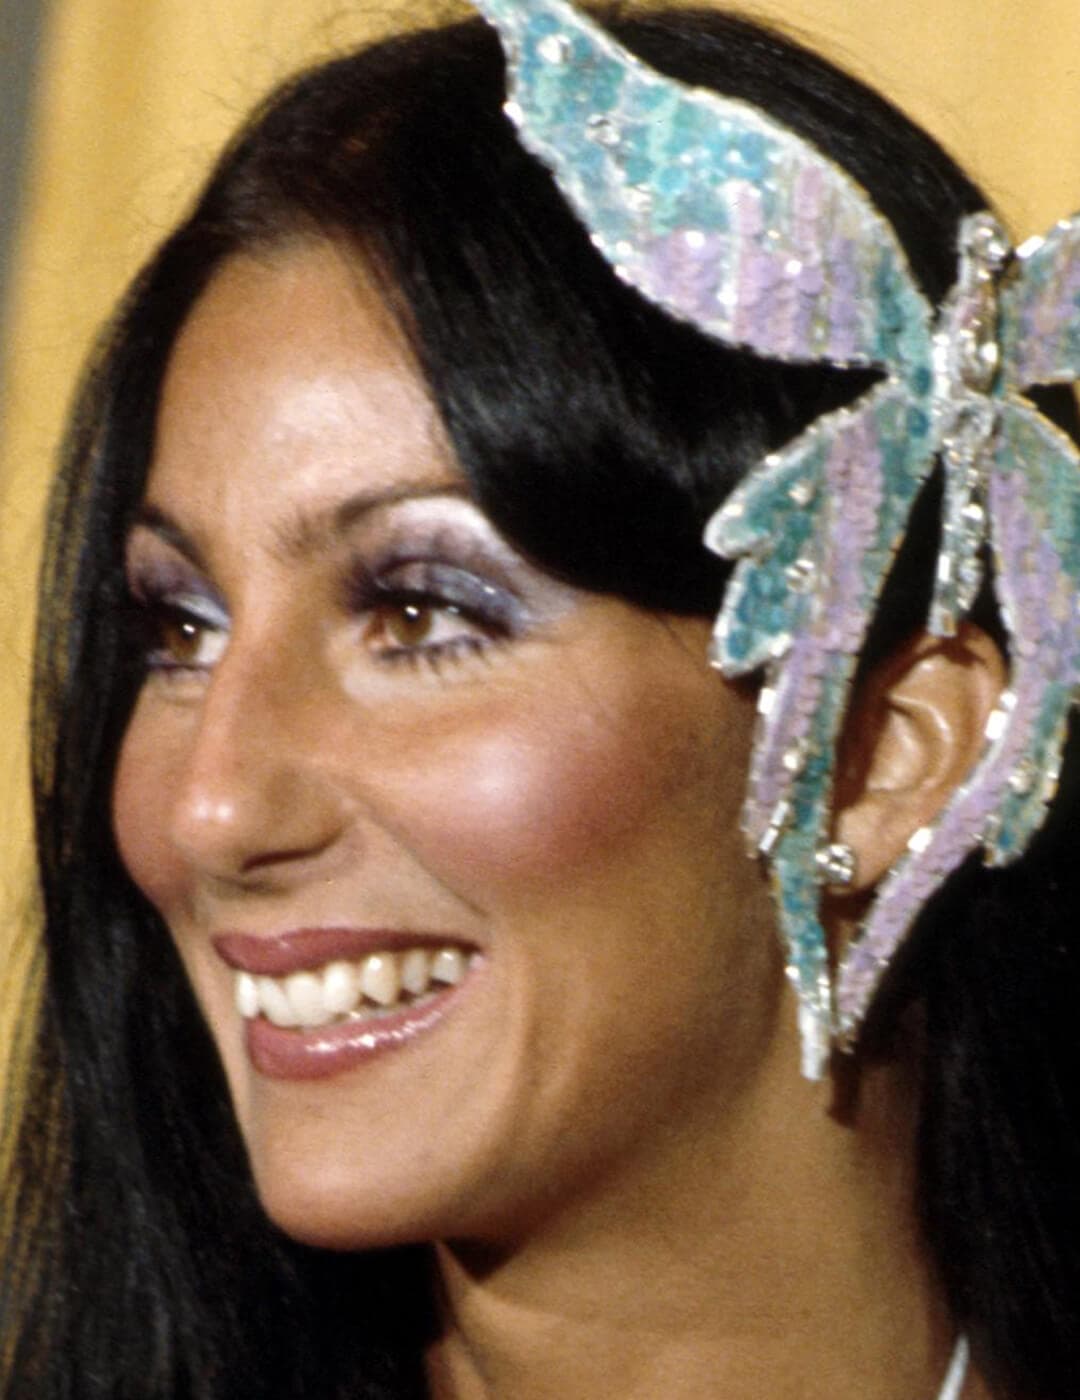 A photo of Cher wearing a large butterfly pin in her hair on March 2, 1974 in Los Angeles